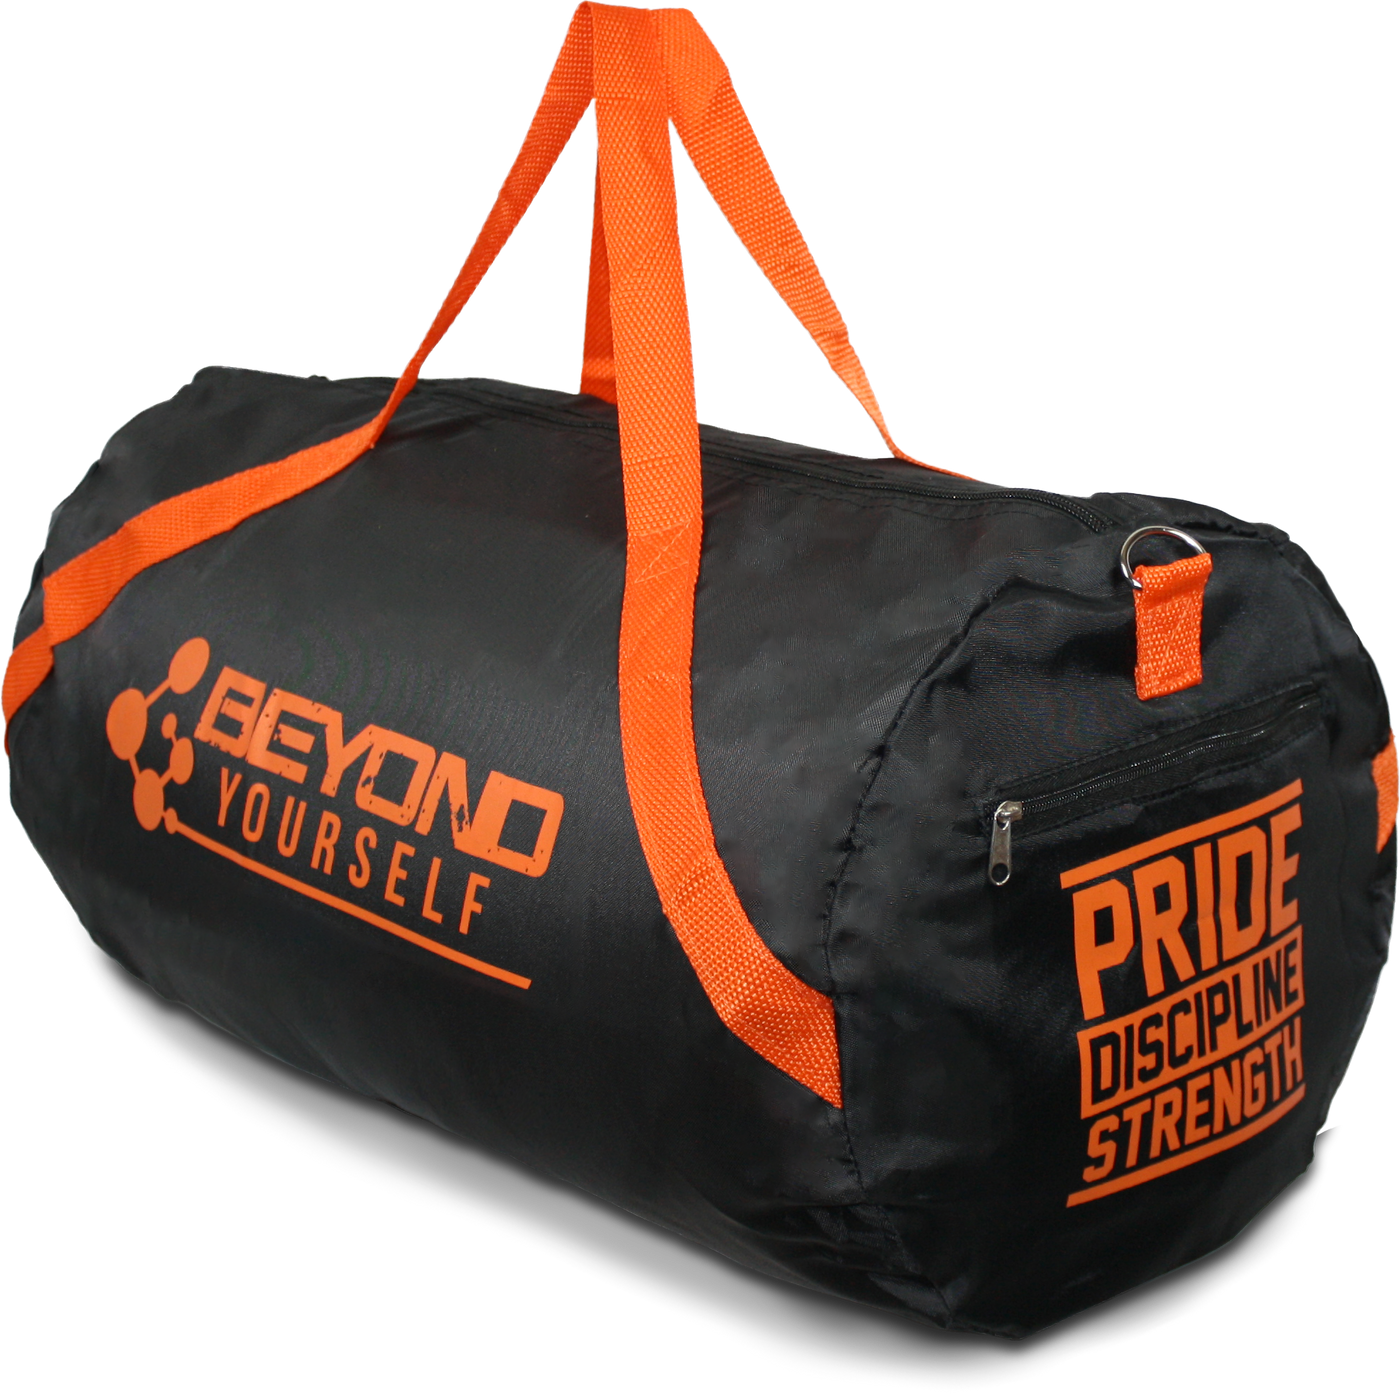 Beyond Yourself Limited Edition Duffle Bag